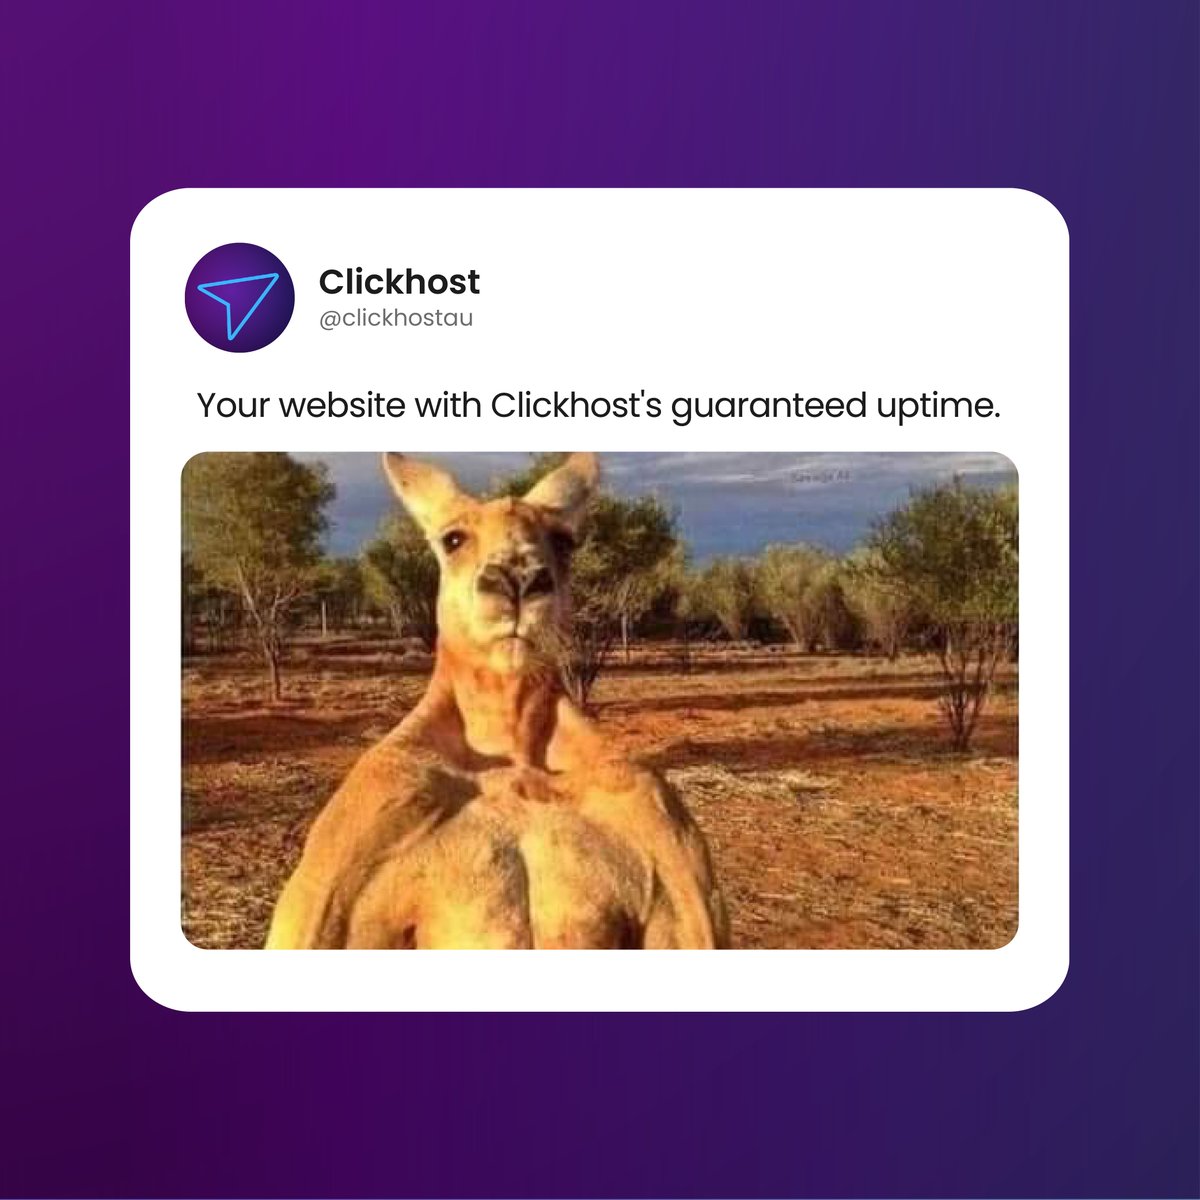 Make your website tougher than a roo by hosting it right here in Oz with Clickhost.

We'll give you top-notch uptime, lightning-fast loads, and quick-as-a-snake response times to tackle any traffic spikes. Too easy!

#aussiewebhosting #webhosting #supportlocal #clickhost #meme